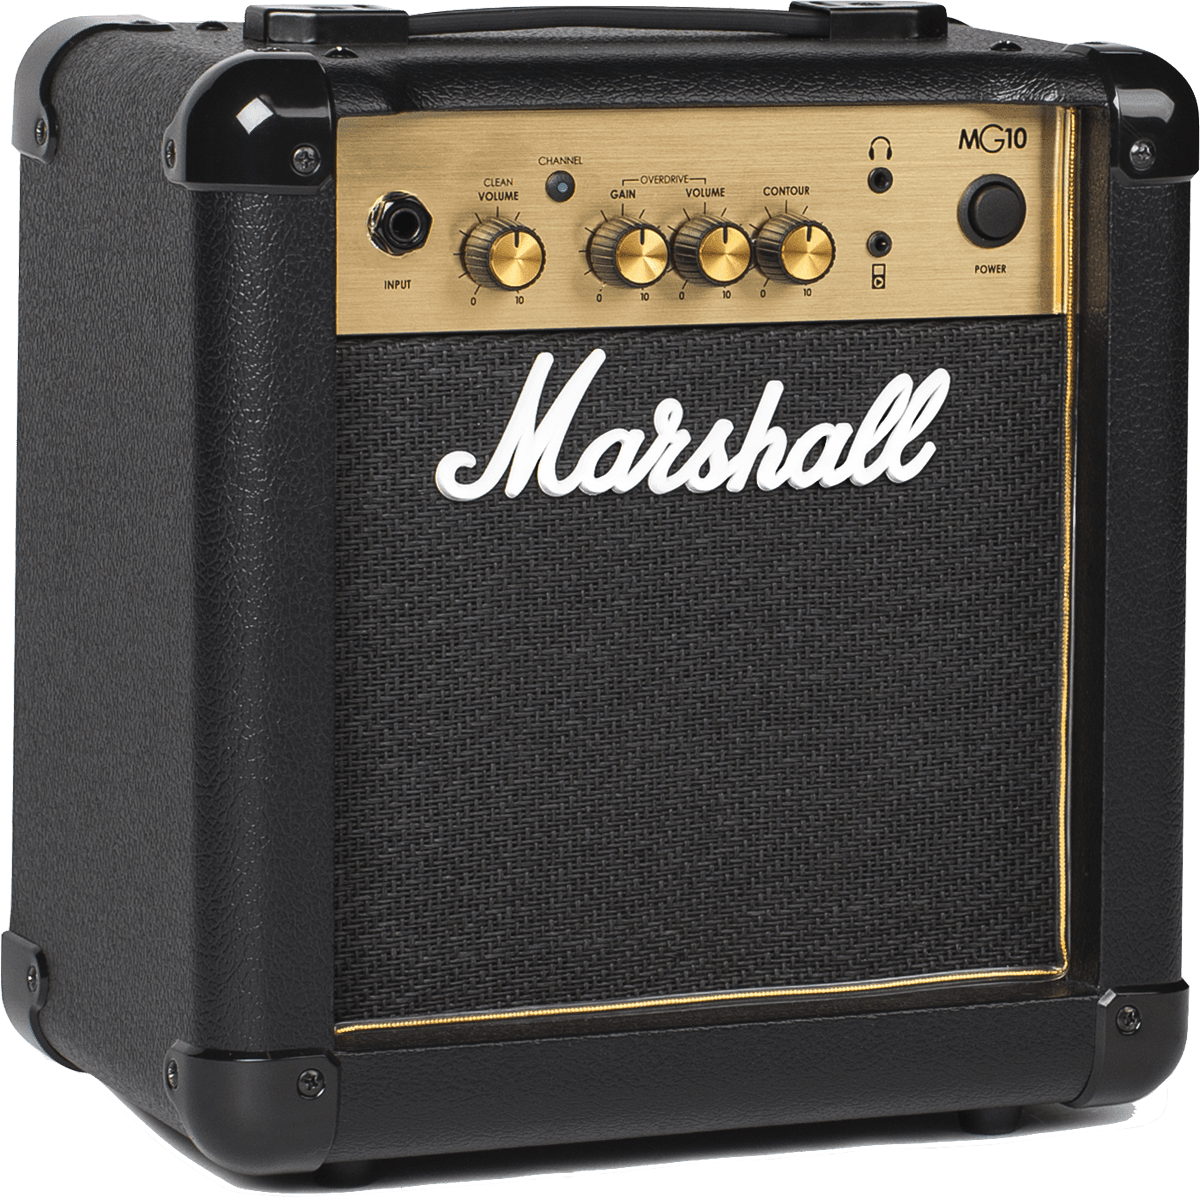 Eastone Tl70 +marshall Mg10g Combo 10 W +housse +courroie +cable +mediators - Black - Packs guitarra eléctrica - Variation 6